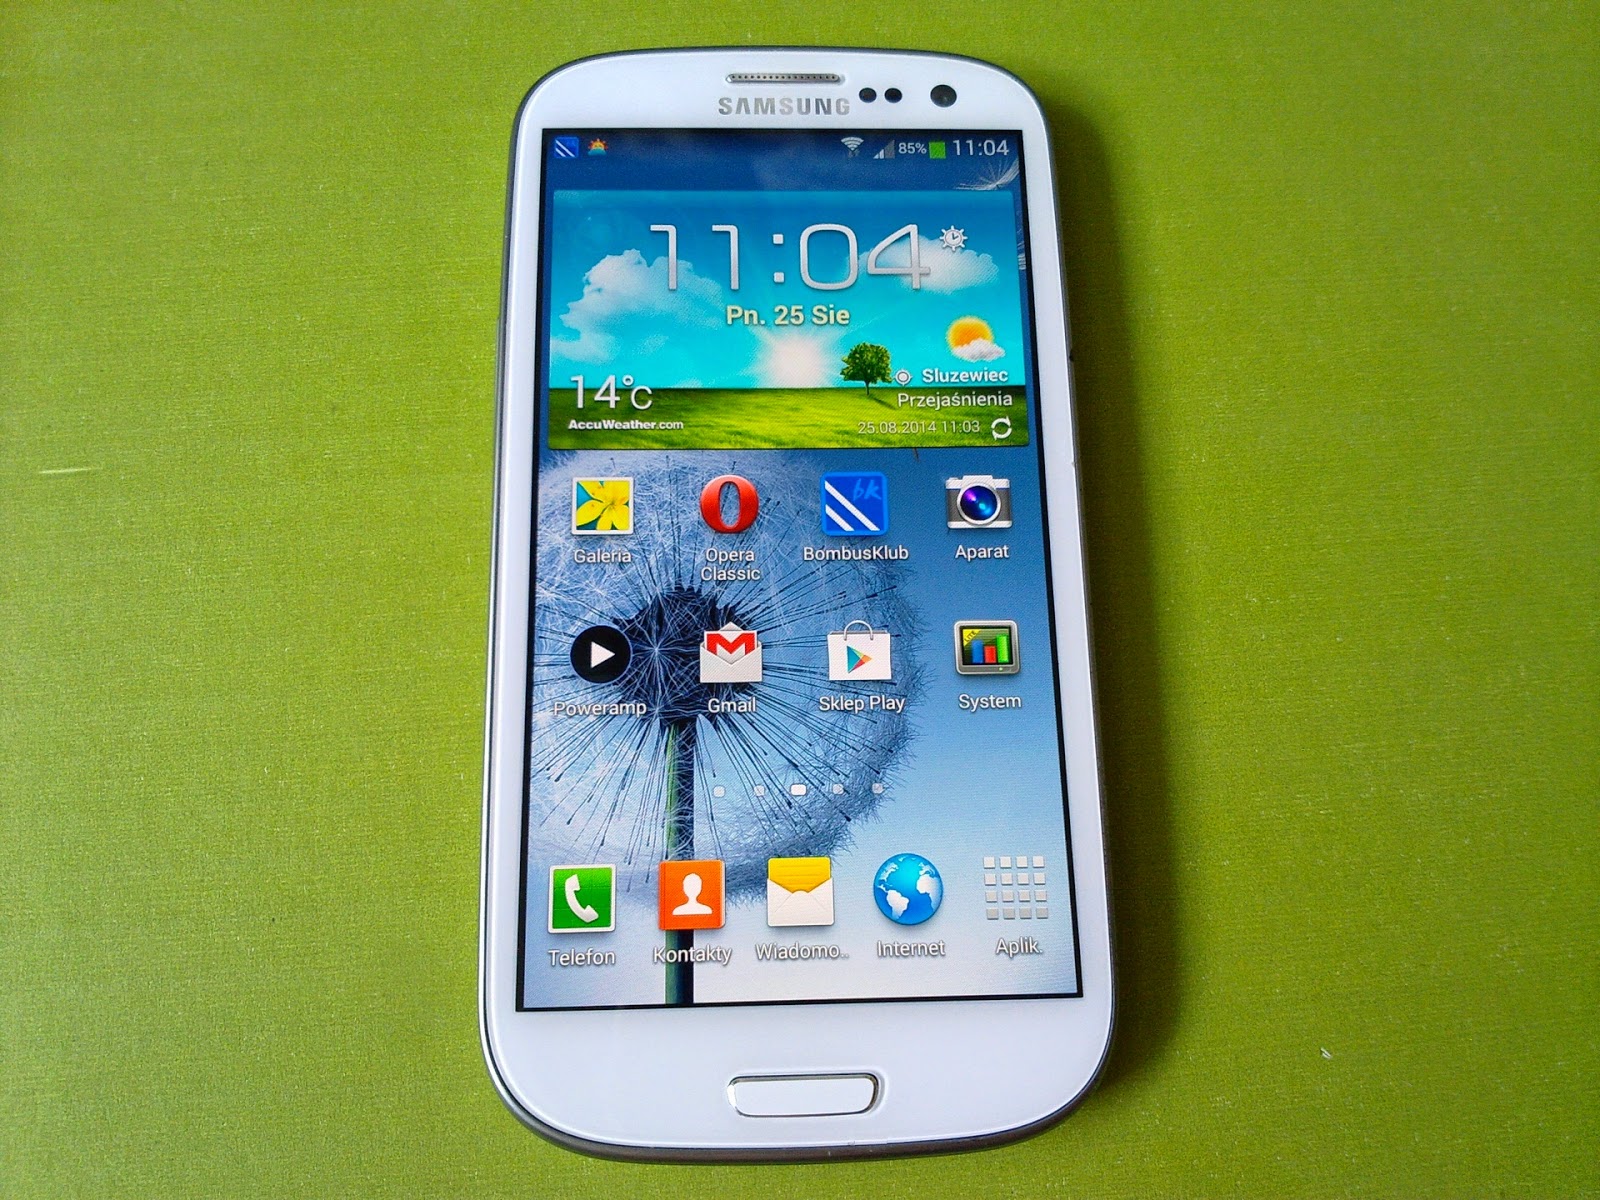 Samsung Galaxy S III LTE GT-I9305 Review [Video] - All About Samsung